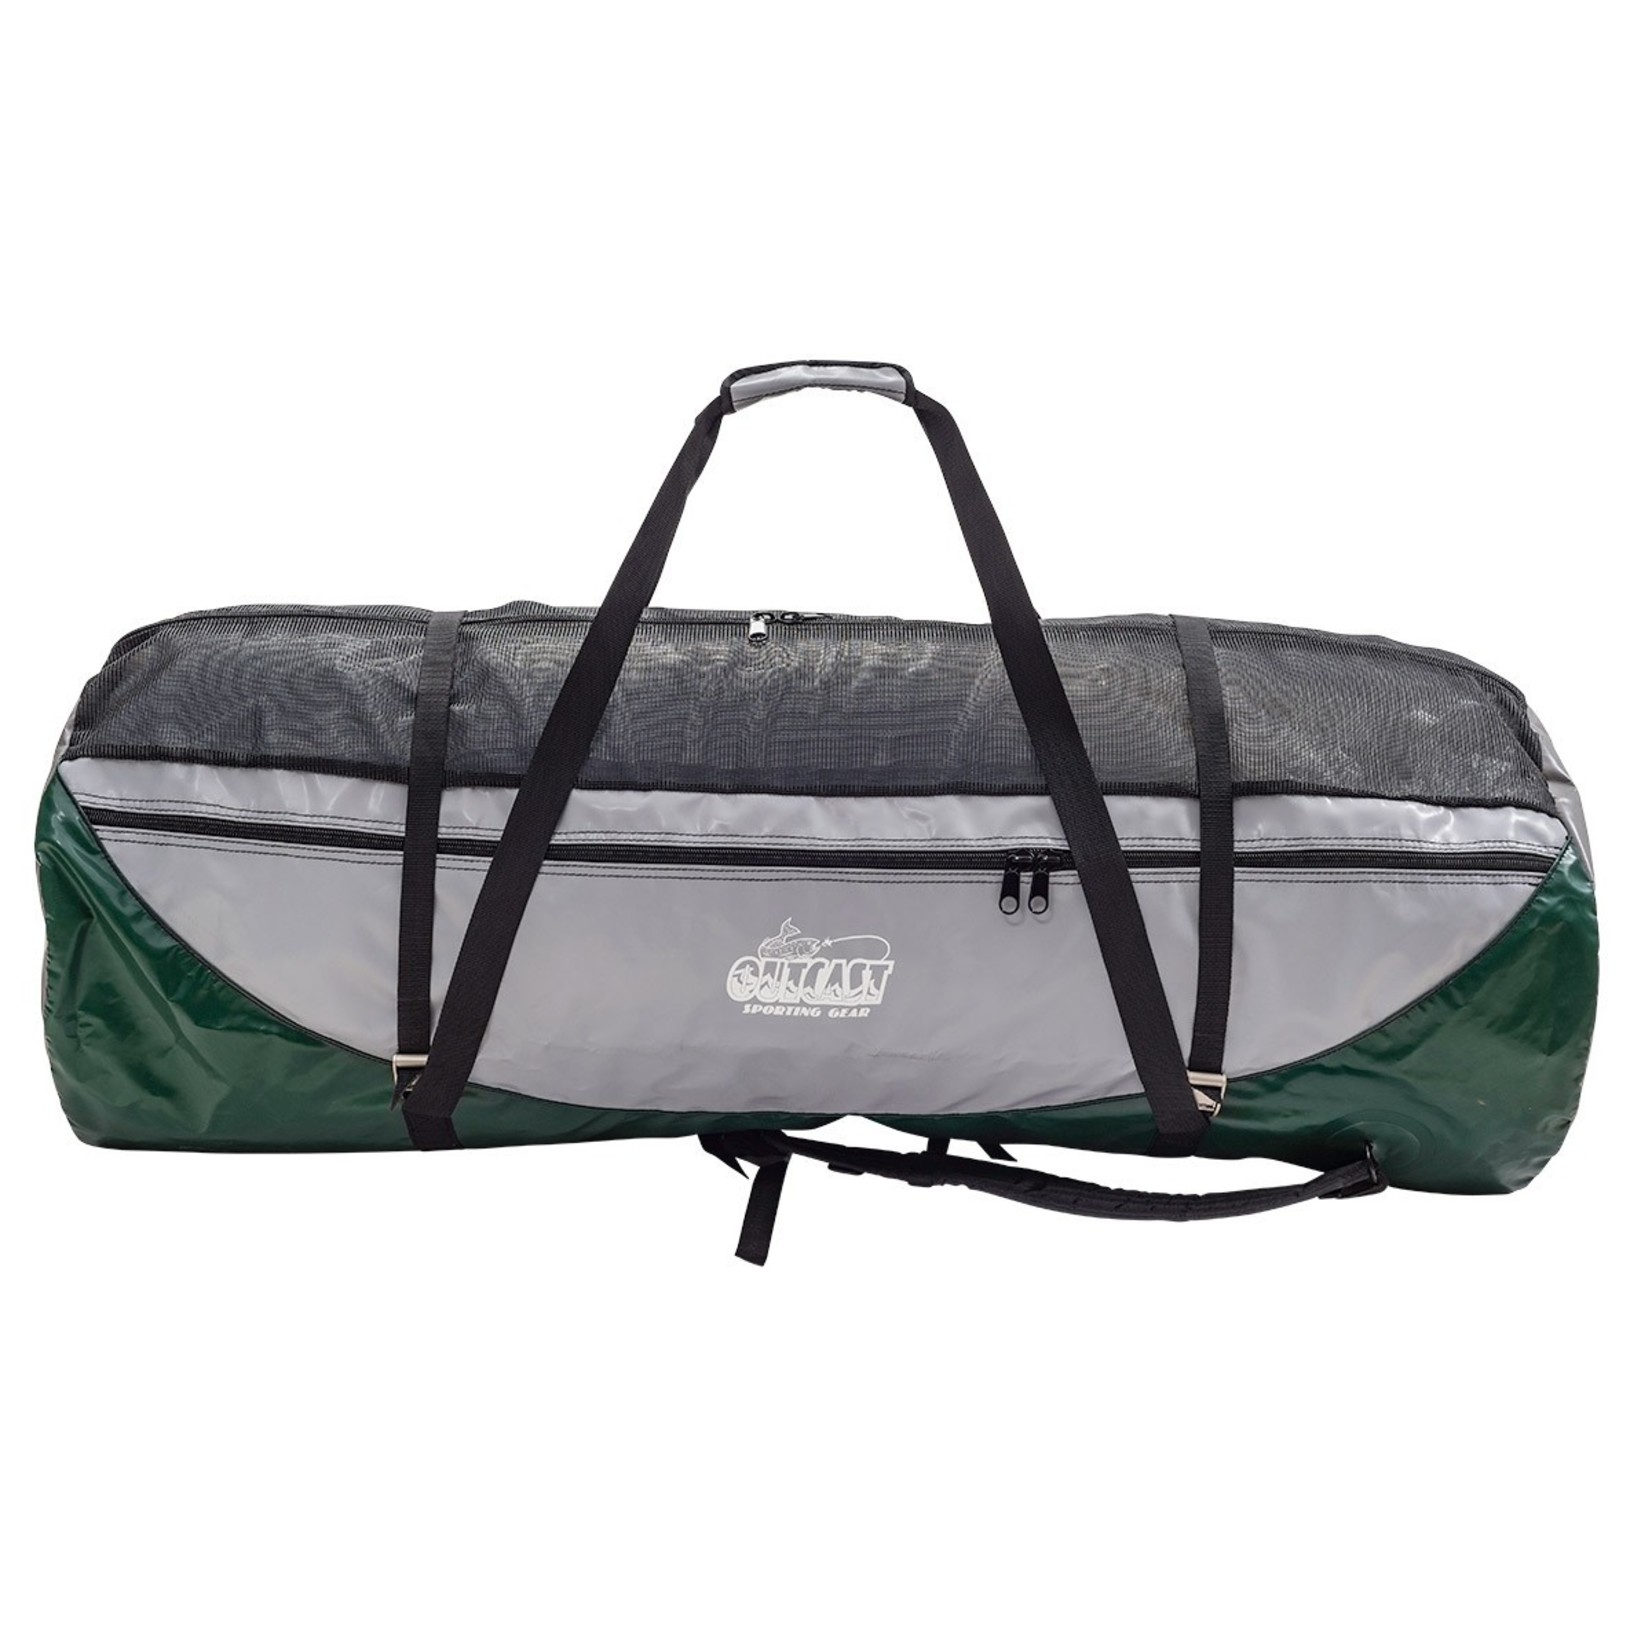 AIRE AIRE Frameless Boat Bag - Green/Gray